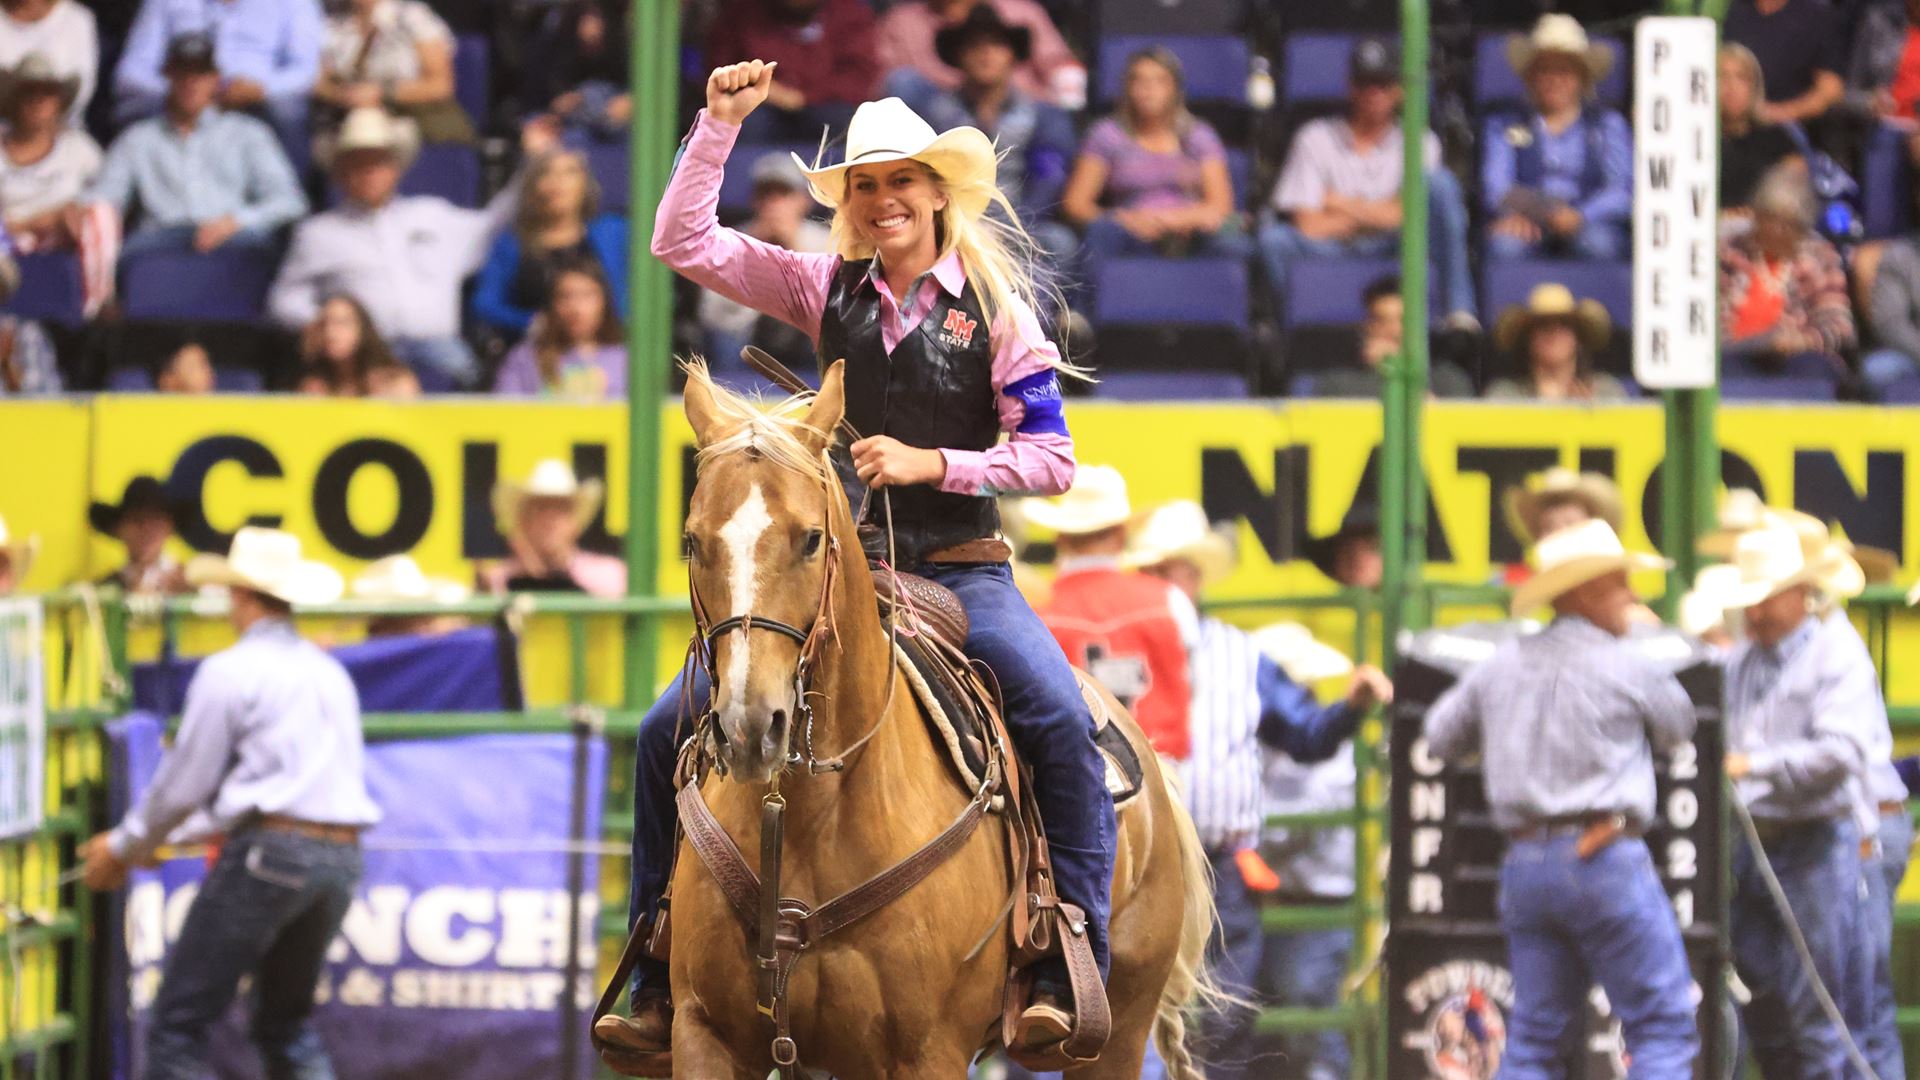 NMSU rodeo team competes in college national finals